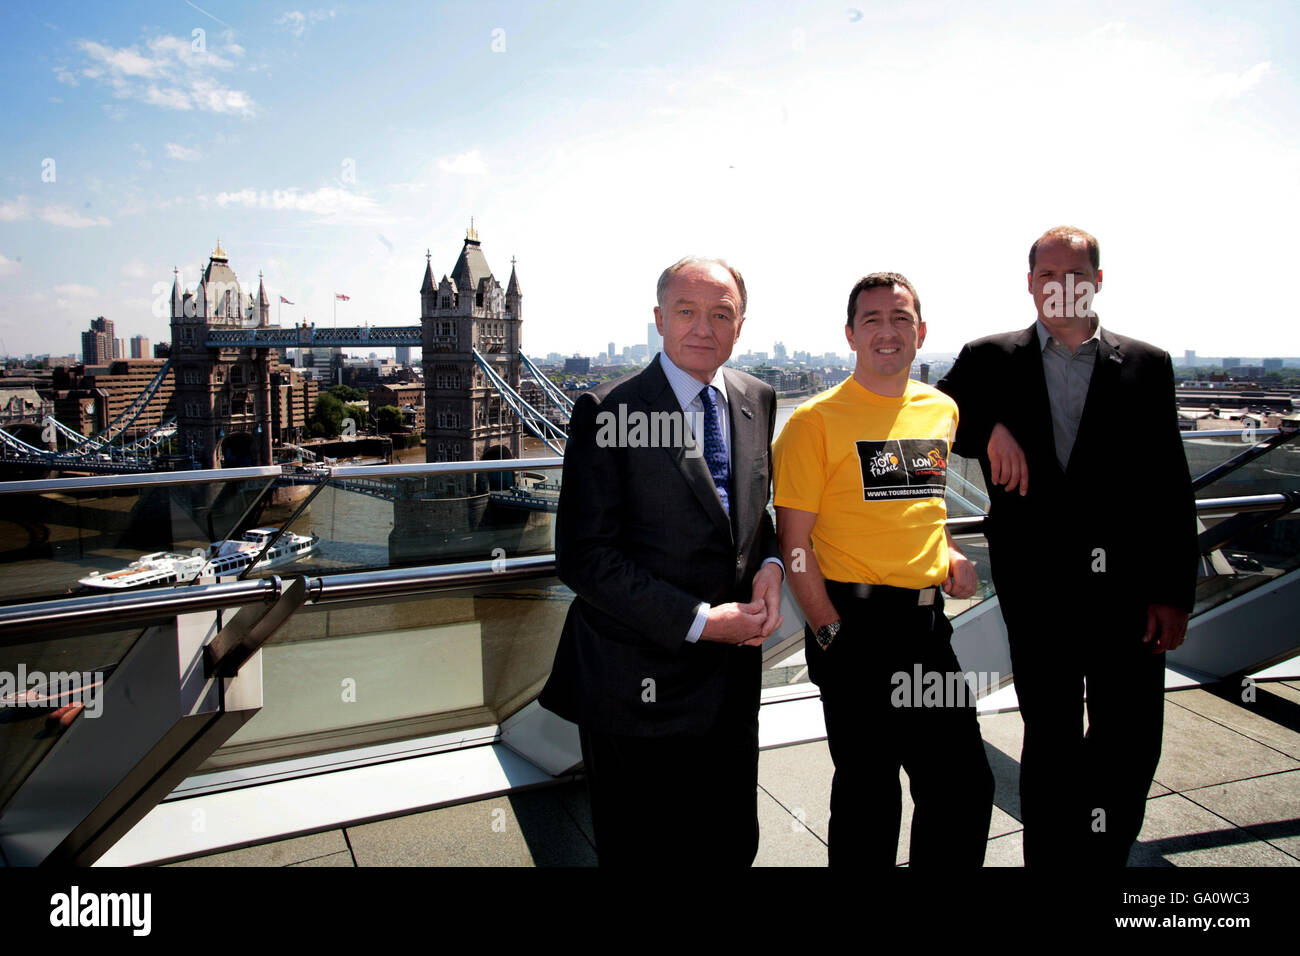 (Left to right) Mayor of London Ken Livingstone, former Tour de France Yellow Jersey holder Chris Boardman, and head of the Tour de France Christian Prudhomme at Livingstone's weekly press conference at City Hall, London, to promote next month's Tour de France Grand Depart. Stock Photo